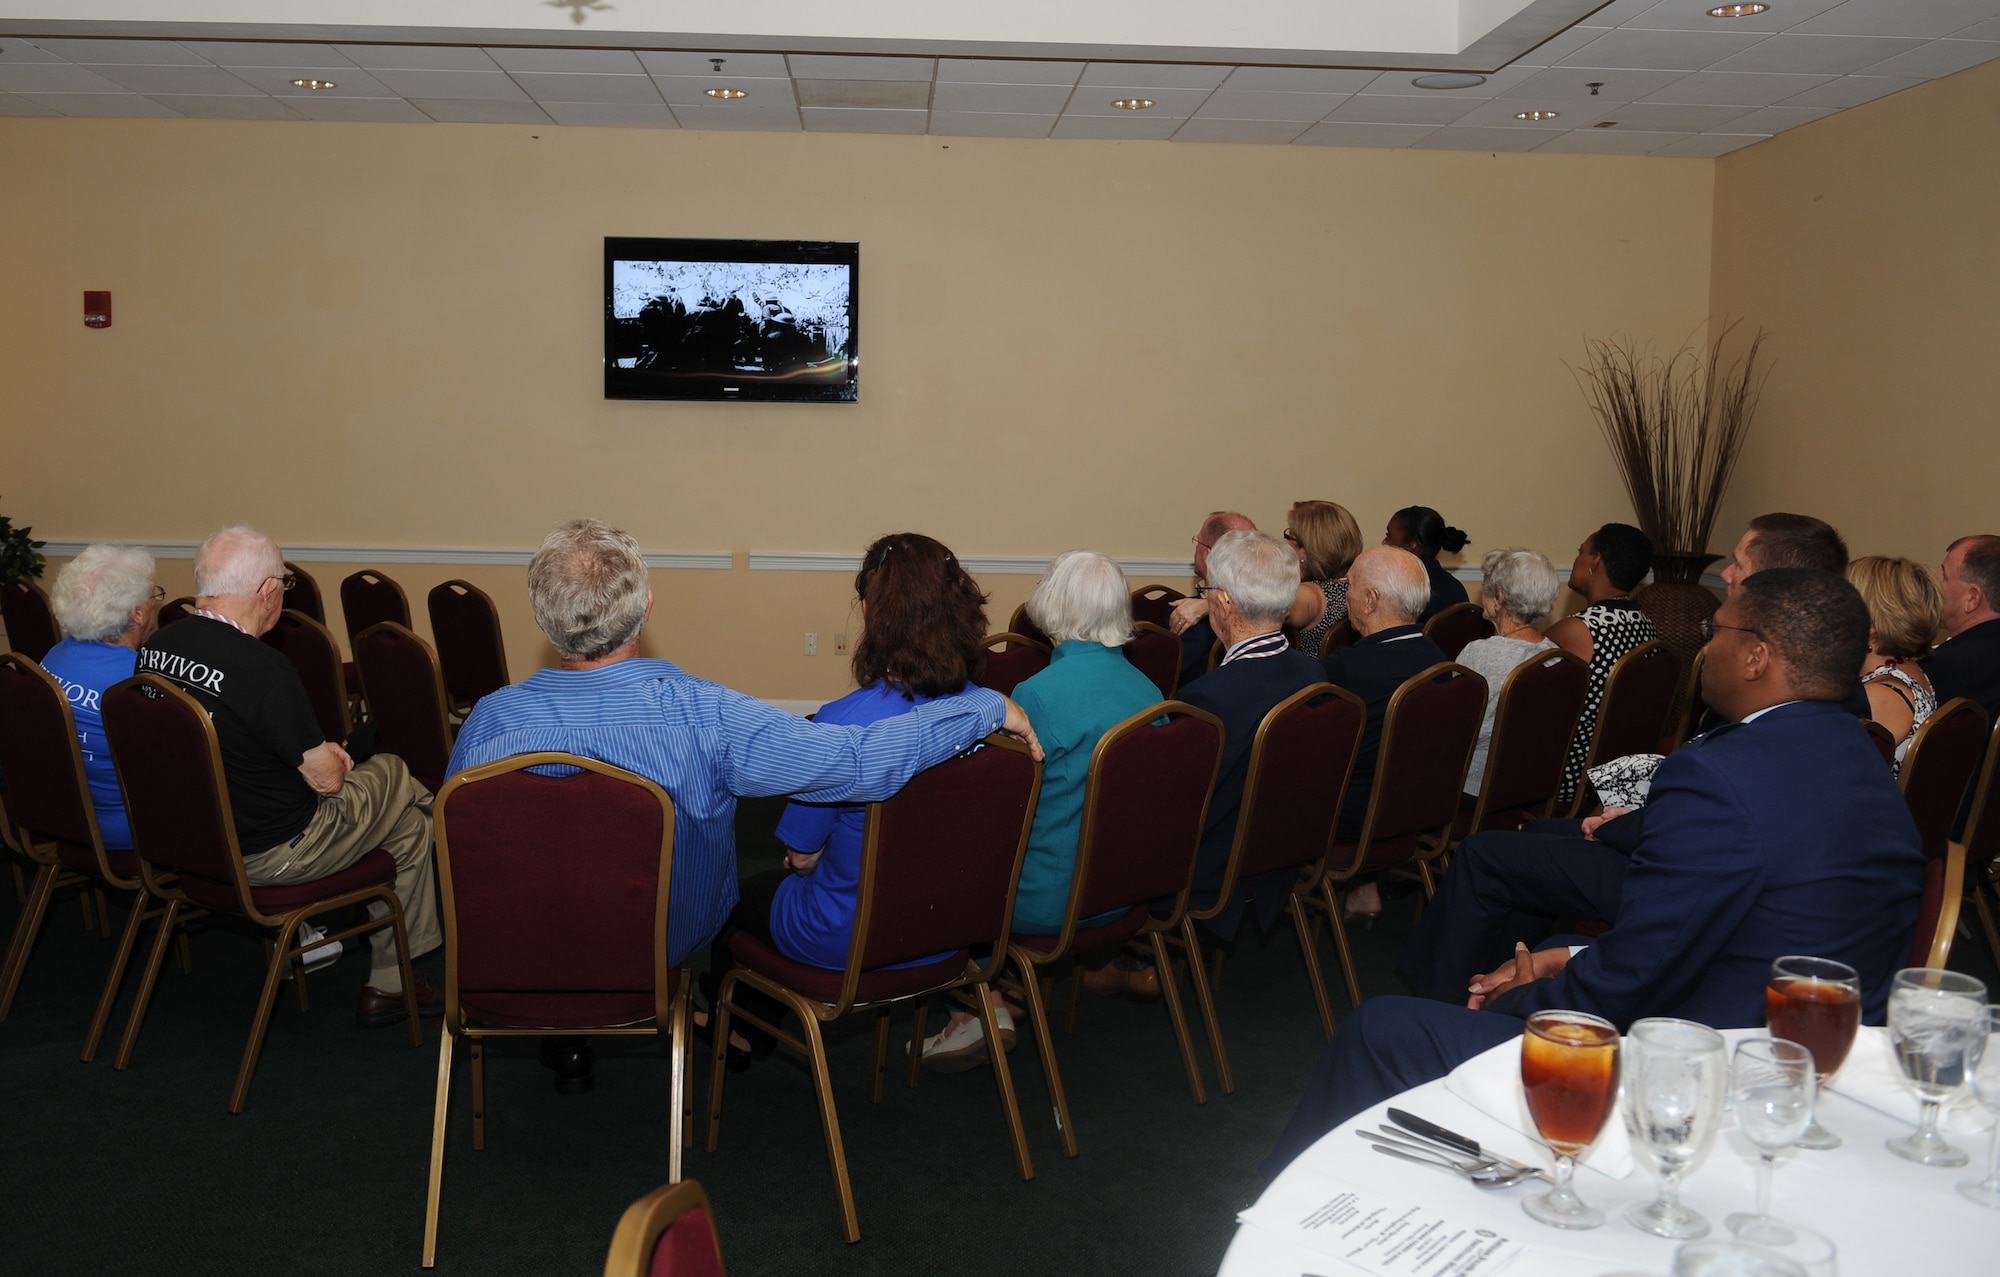 Bataan Death March survivors, their family members and Barksdale Air Force Base, La., leadership watch a film telling the story of the Bataan Death March at Boomtown Casino, Bossier City, La., Sept. 3. Five former prisoners of war were honored during a dinner event where they received medals on behalf of the Philippines. (U.S. Air Force photo/Airman 1st Class Benjamin Gonsier)(RELEASED)
